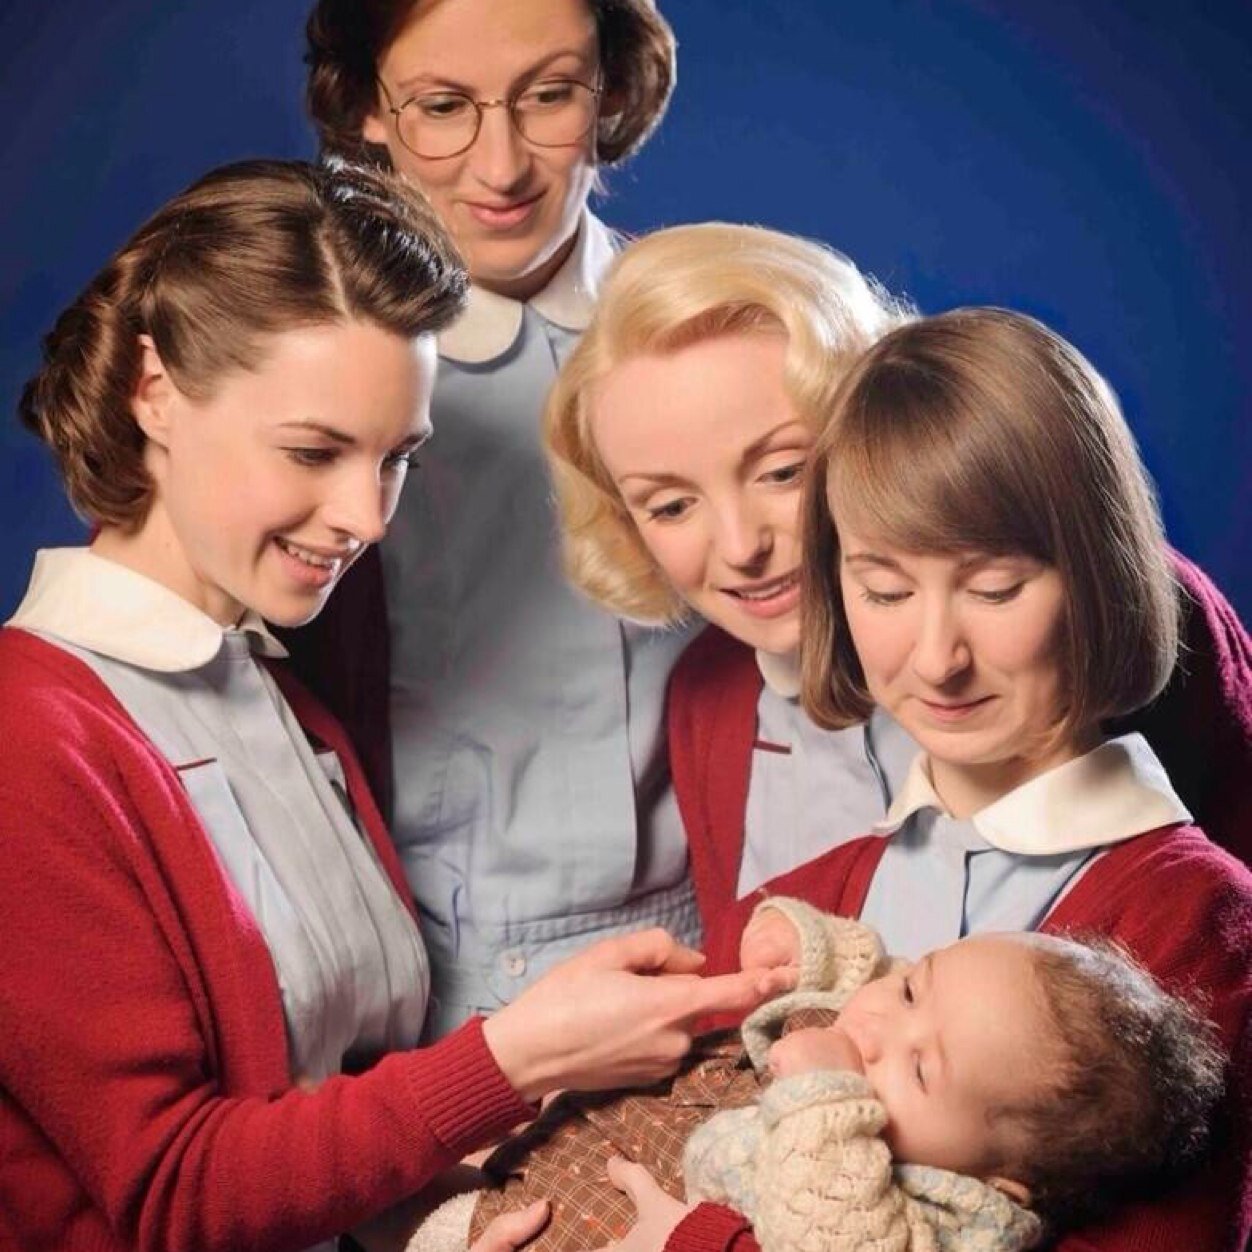 New fanpage for the smash hit TV series Call The Midwife. Great for all fans for news, pictures and more. Please follow its run by fans for the fans